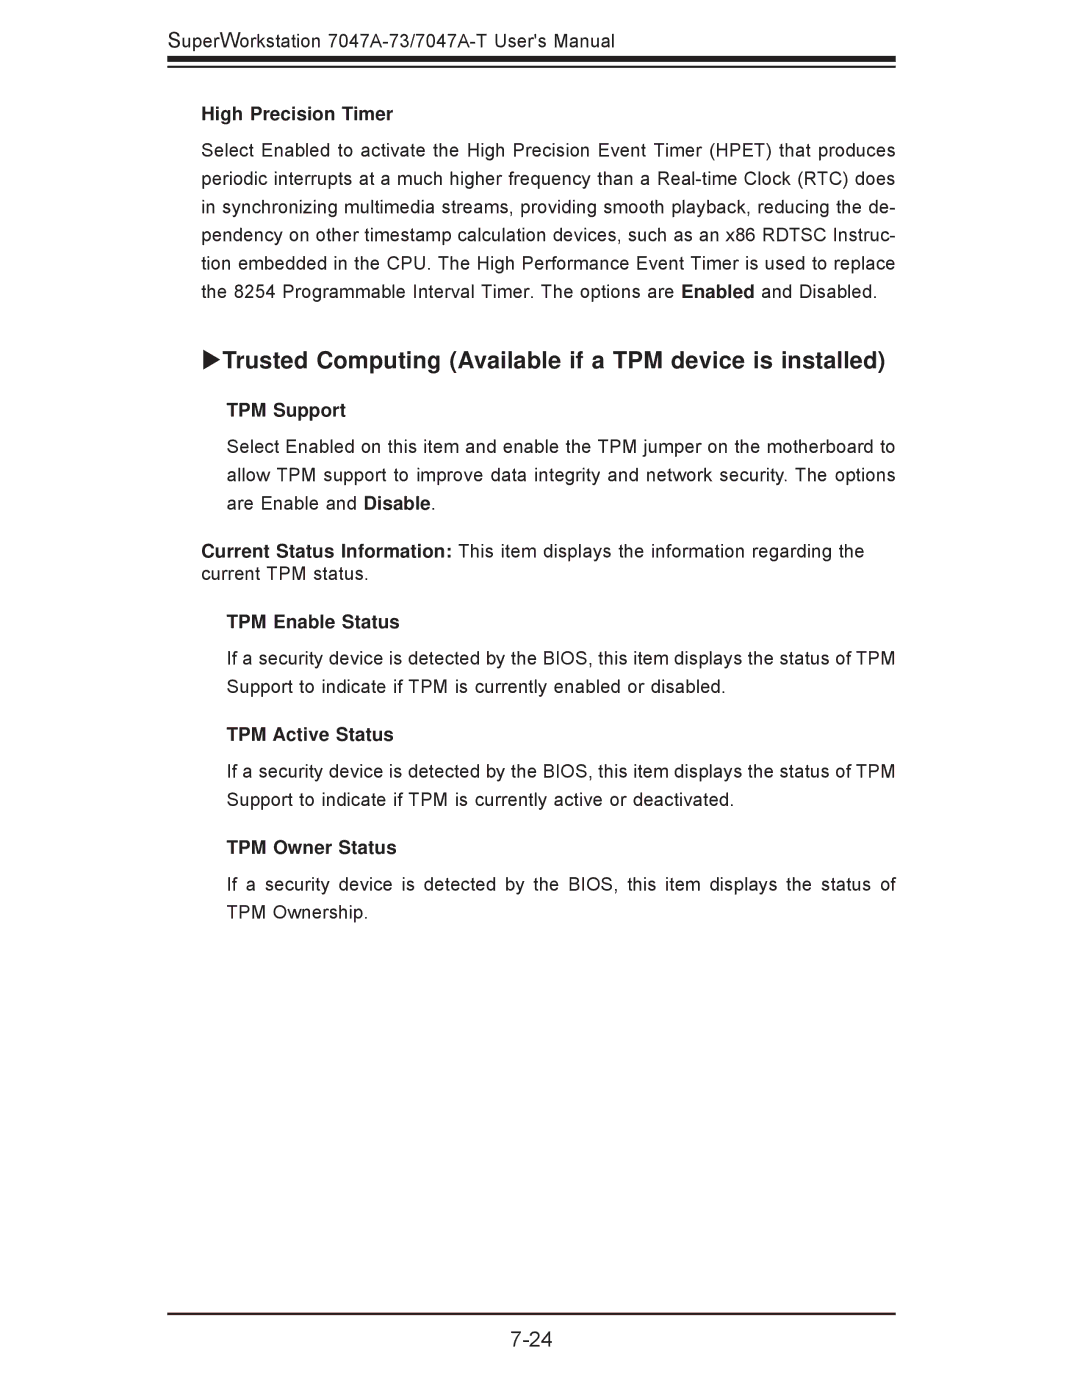 SUPER MICRO Computer 7047A-T, 7047A-73 user manual XTrusted Computing Available if a TPM device is installed 